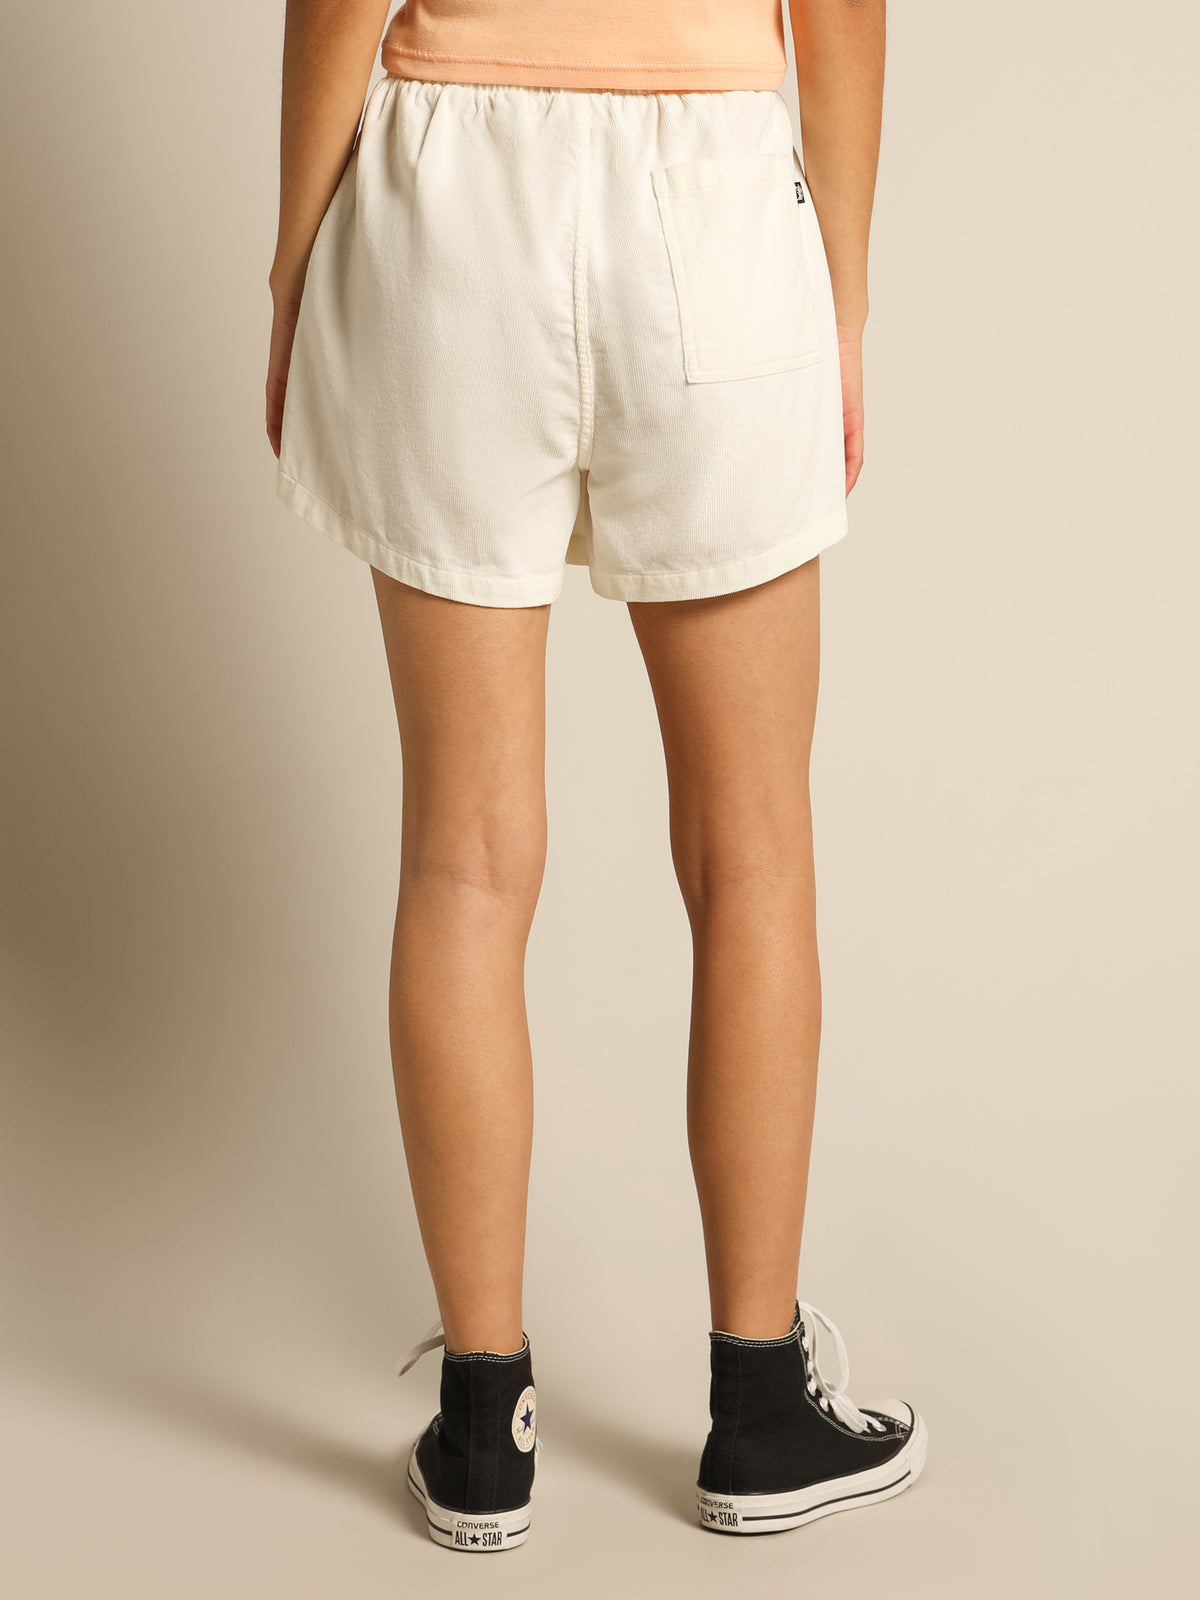 Stock Cord Shorts in White